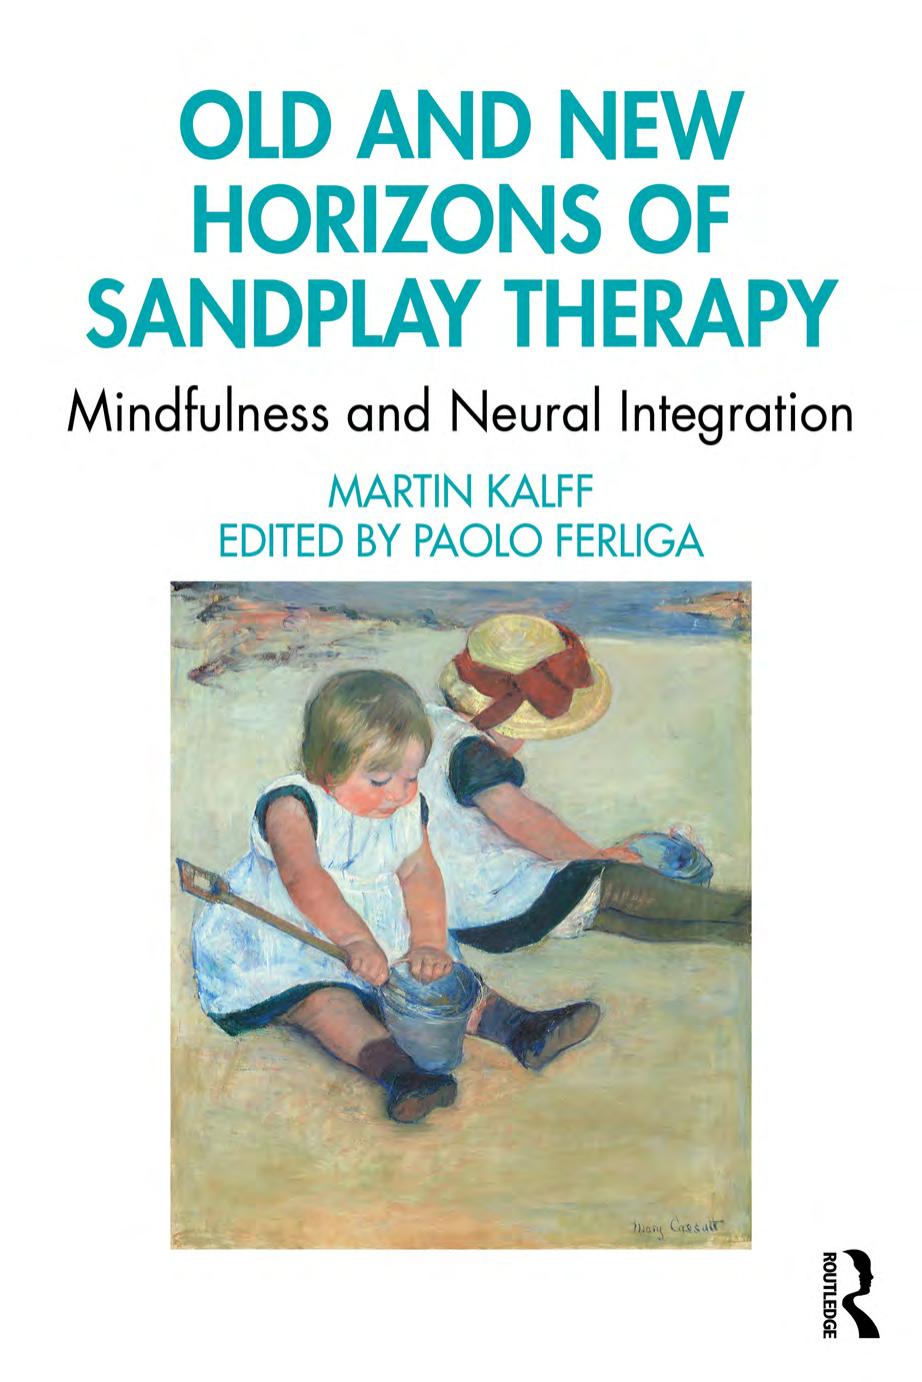 (eBook PDF)Old and New Horizons of Sandplay Therapy: Mindfulness and Neural Integration by Martin Kalff,Paolo Ferliga